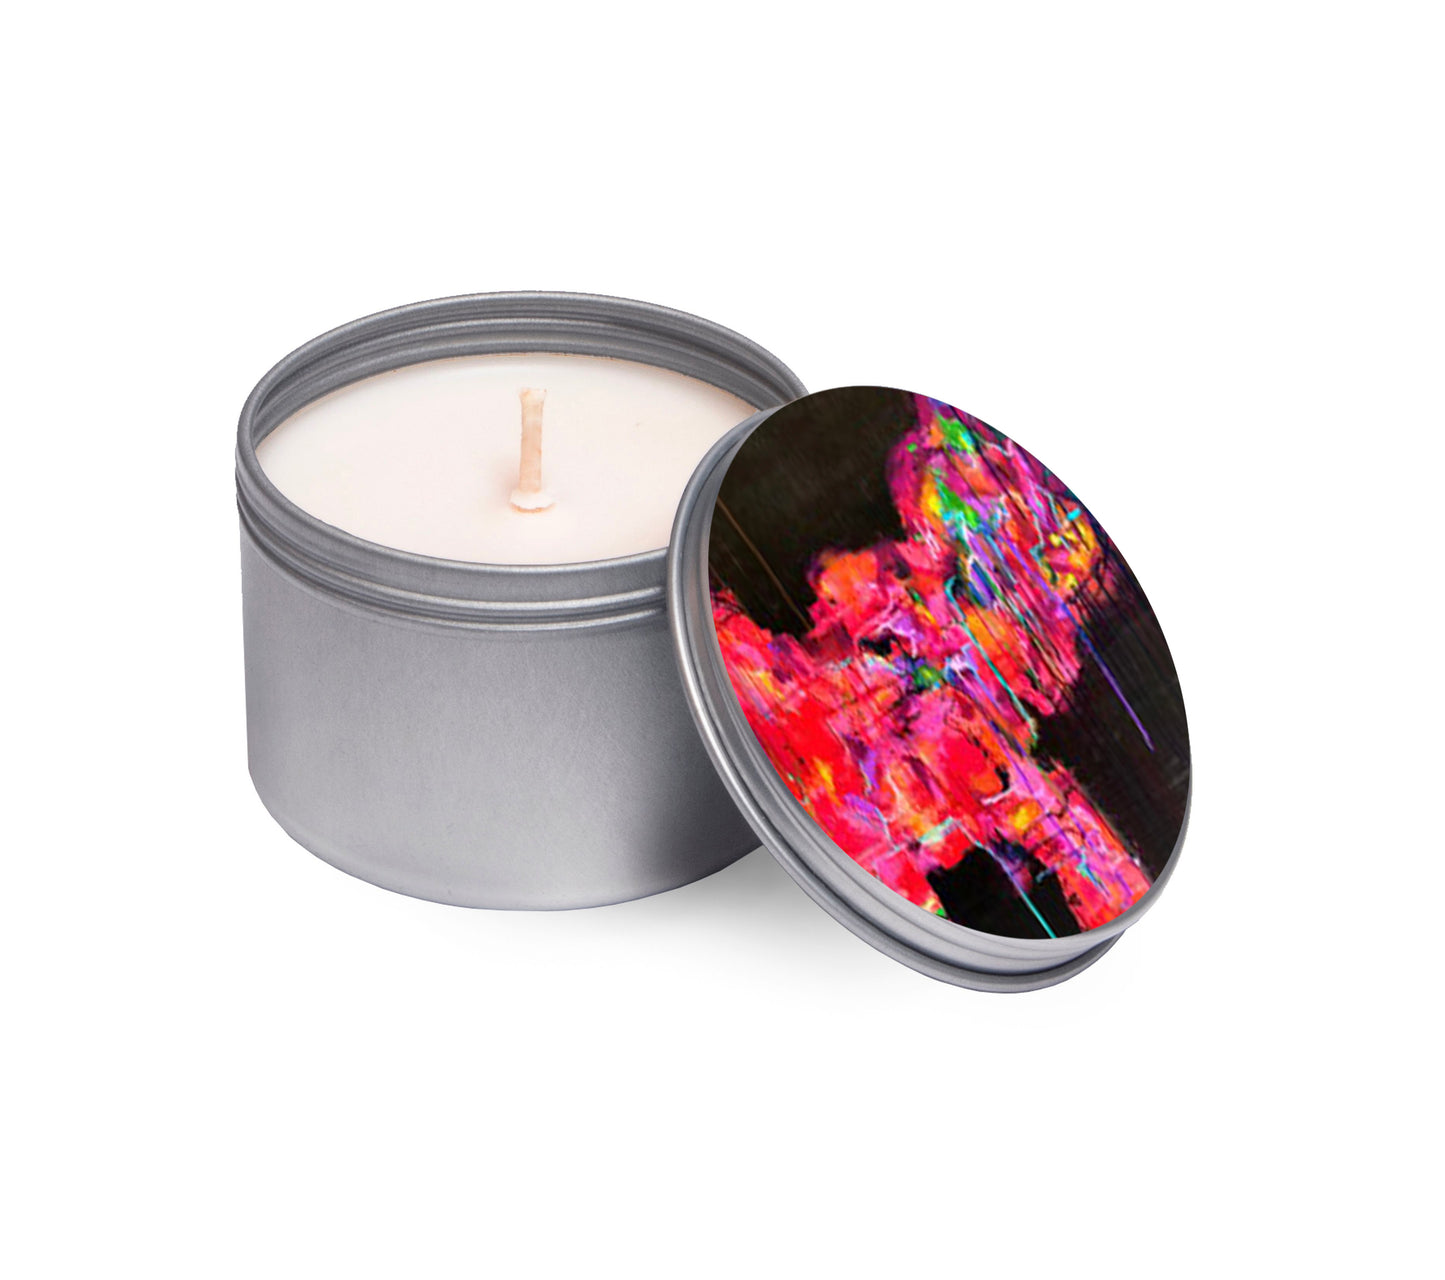 4 oz spark candle with artwork by Anna Feneis